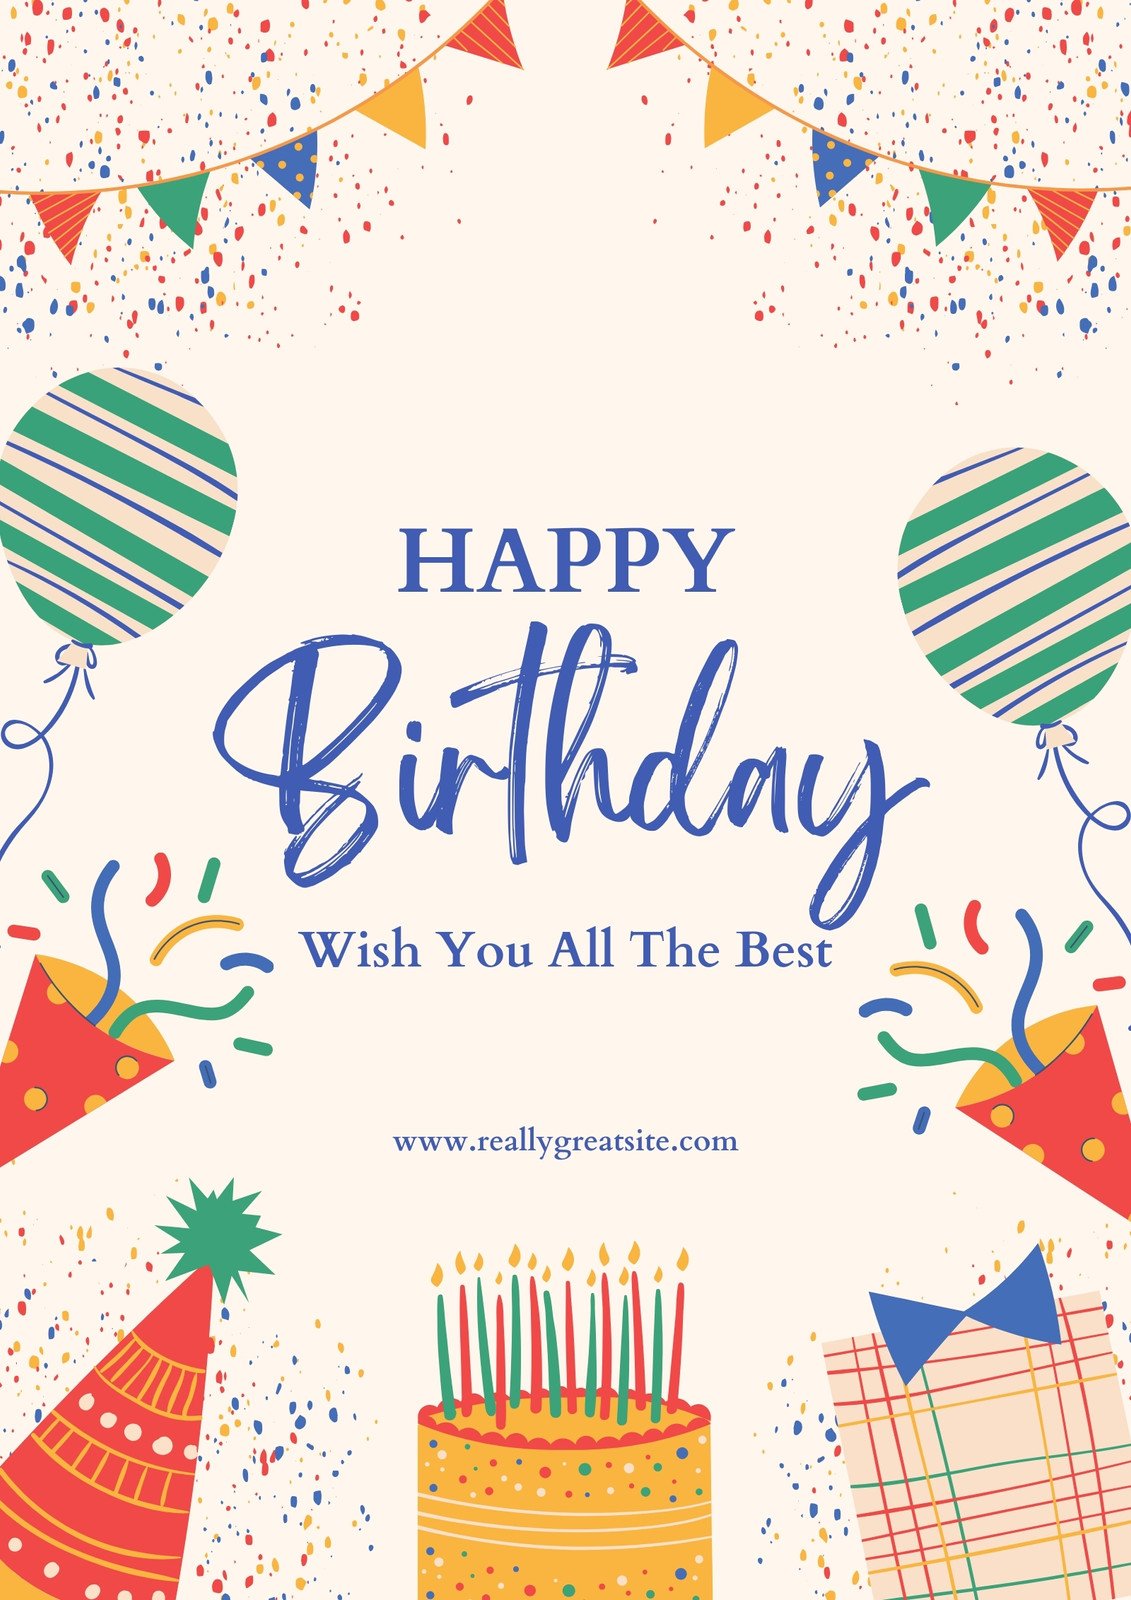 https://marketplace.canva.com/EAFzUFg0qh4/1/0/1131w/canva-blue-and-red-illustrative-happy-birthday-flyer-_vKLUF1a0i0.jpg